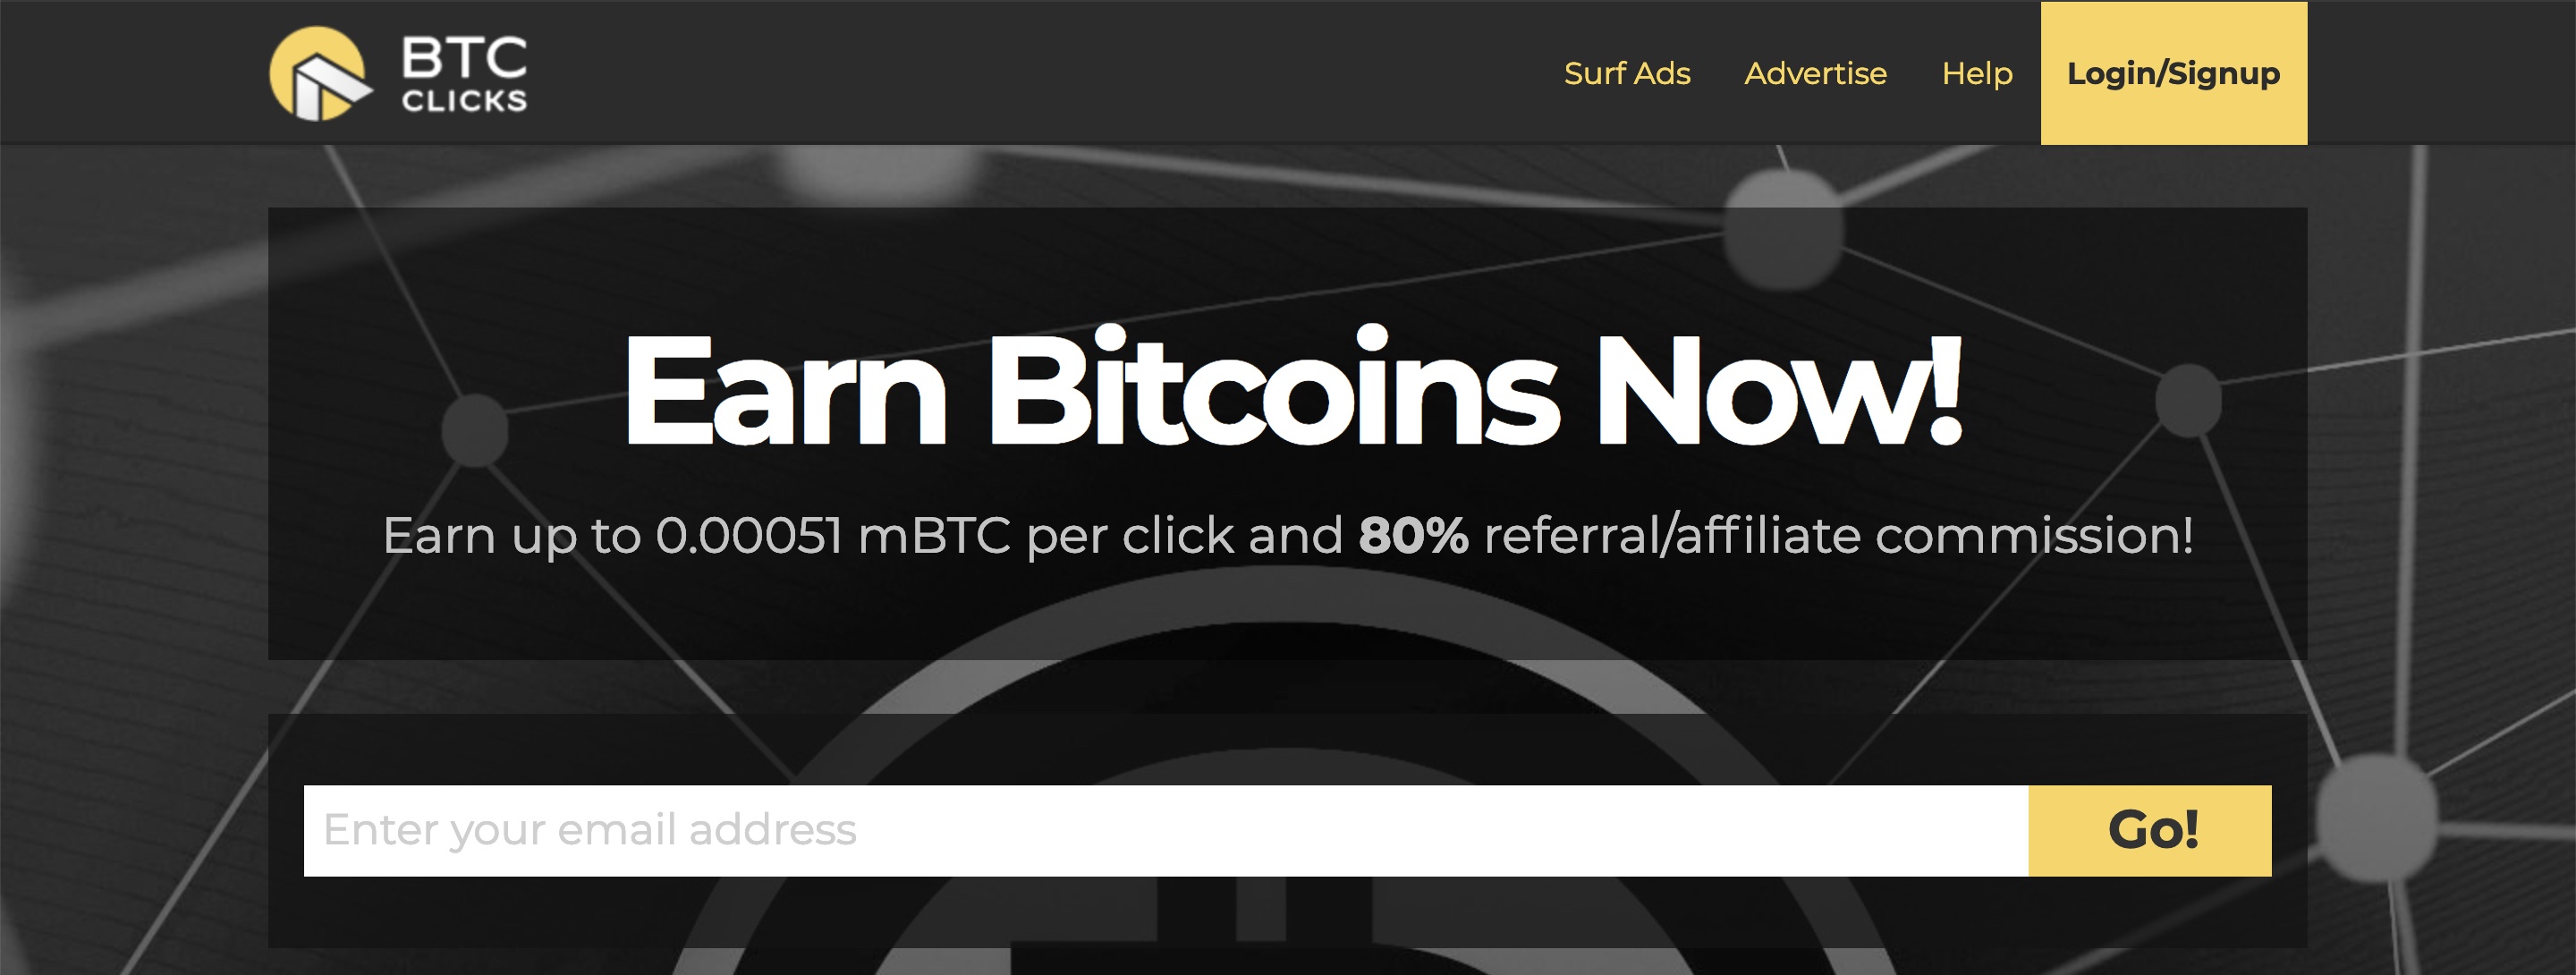 Earn bitcoins by clicking ads